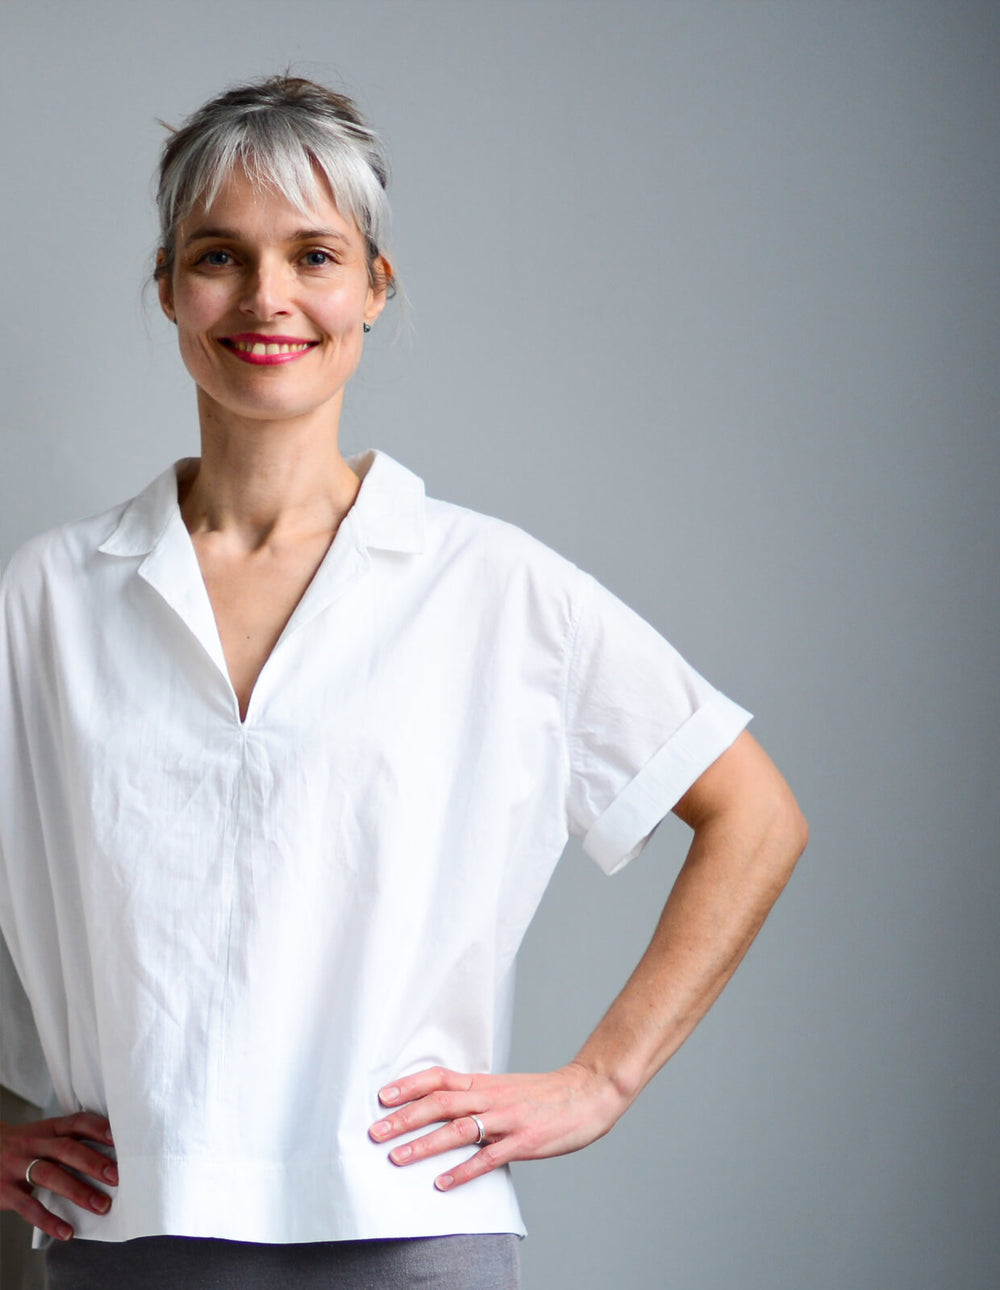 Woman wearing the Holiday Shirt sewing pattern from The Maker's Atelier on The Fold Line. A top pattern made in cottons, linens, lightweight waterproof fabrics and oilskins fabrics, featuring a boxy silhouette, pull-on style, collar, V-neck, and short sle